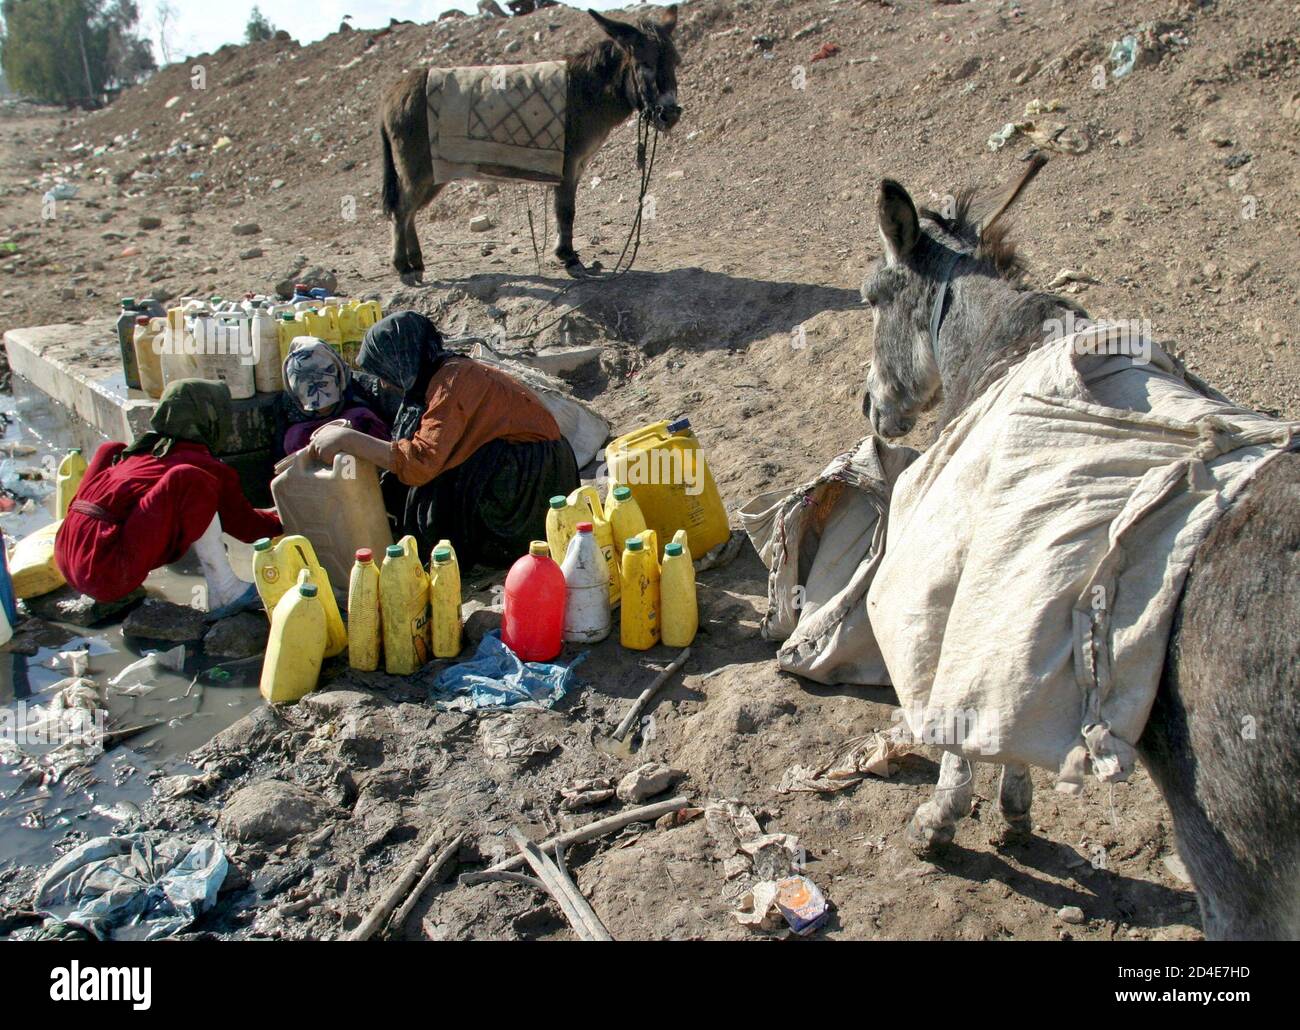 Iraqi girls collect water from a fetid drainage canal in eastern Baghdad,  February 2, 2005. While many Iraqis hope Sunday's national elections will  cement their post-war political power and improve their lives,